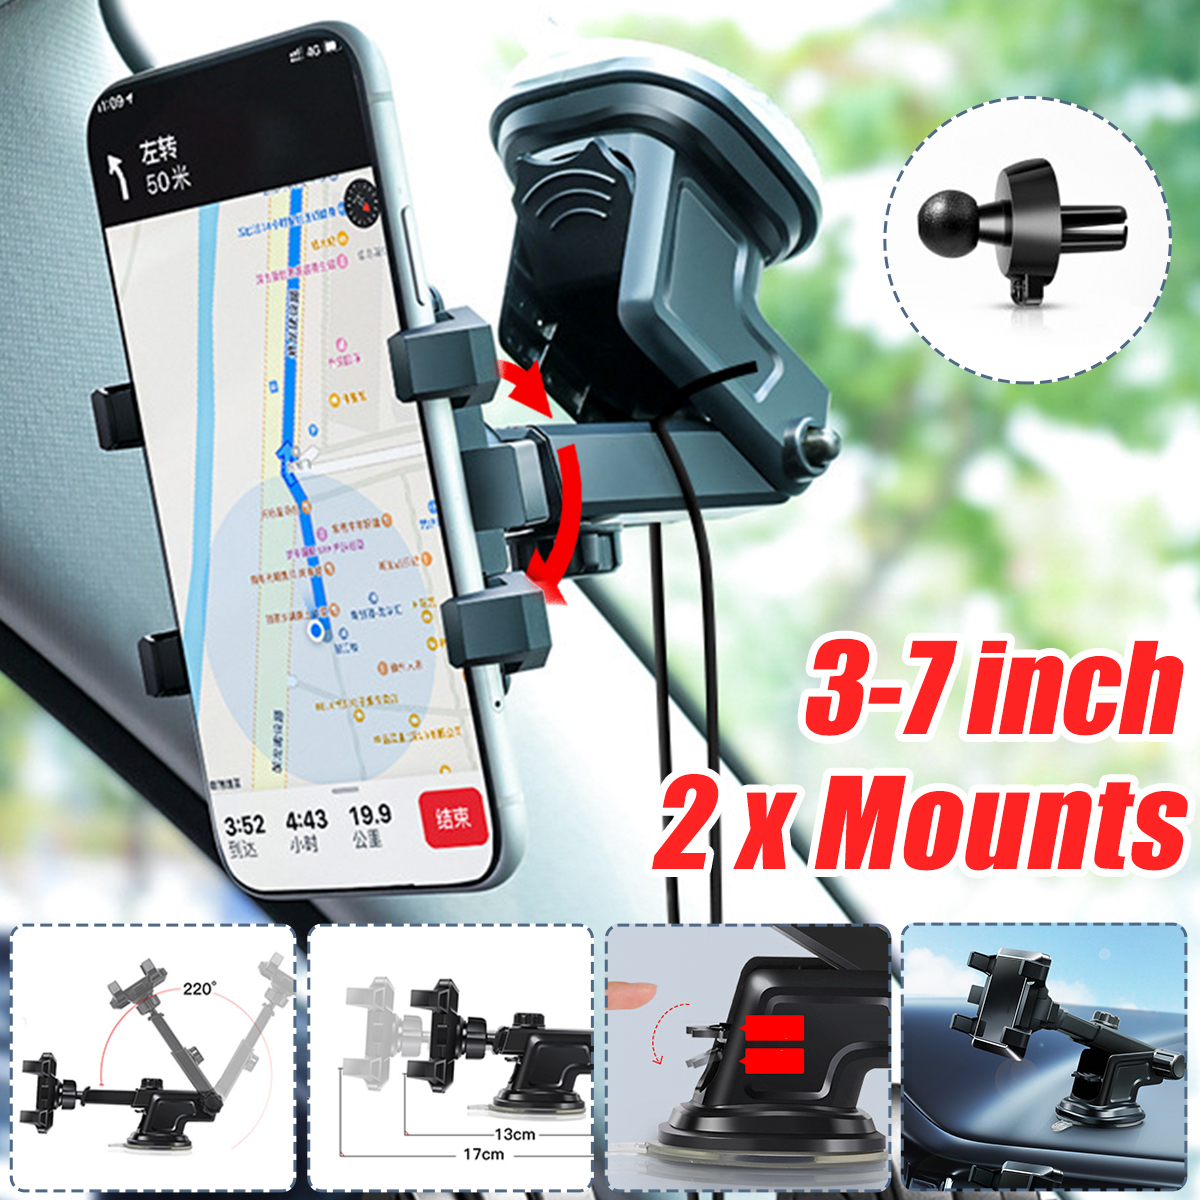 Universal-2-Gear-Fixed-Lock-17cm-Retractable-Arm-Car-Dashboard-Windshield-Mobile-Phone-Mount-Holder--1869563-1